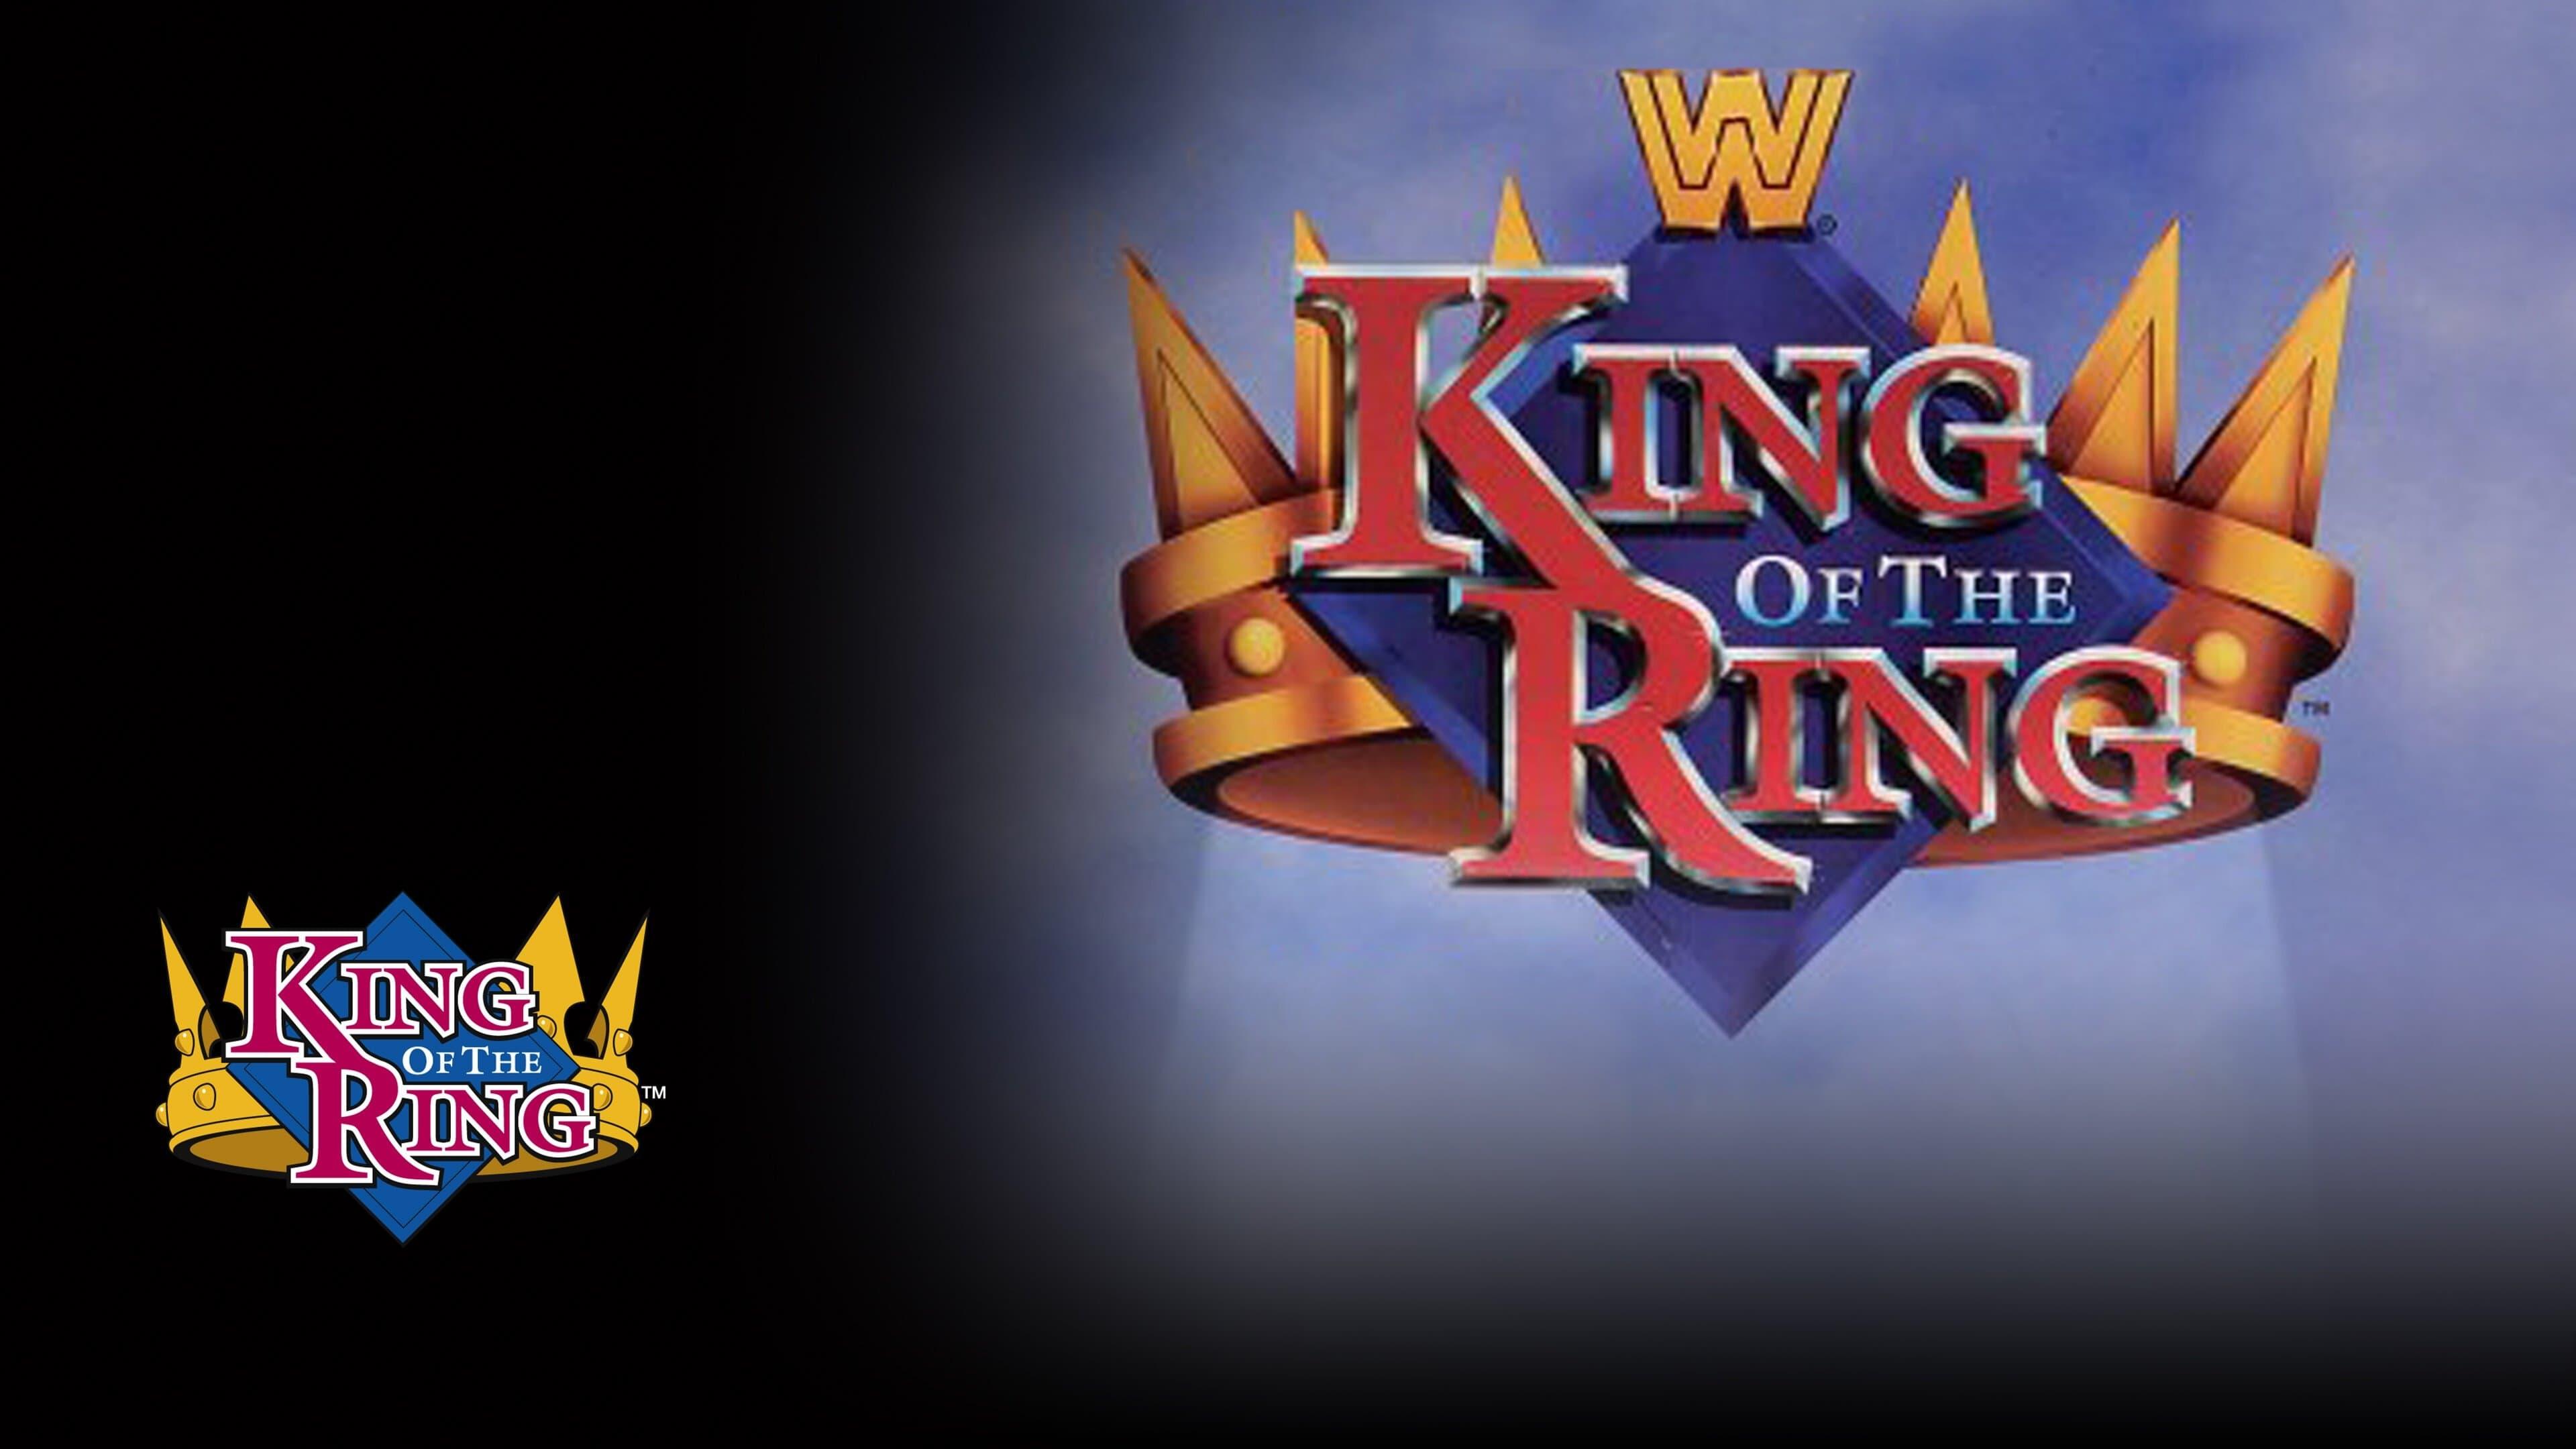 WWE King of the Ring 1995 backdrop